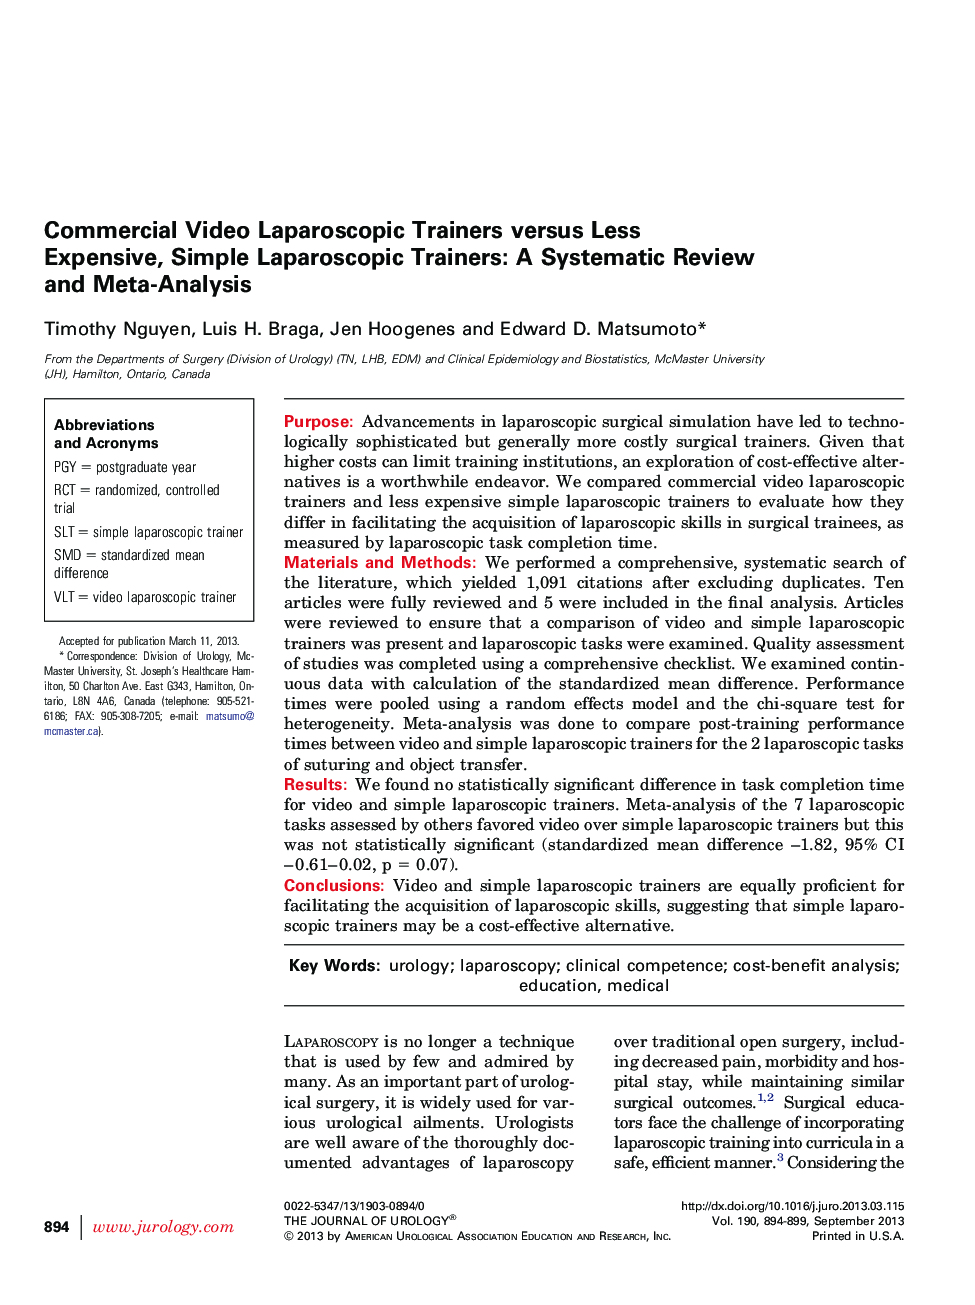 Commercial Video Laparoscopic Trainers versus Less Expensive, Simple Laparoscopic Trainers: A Systematic Review and Meta-Analysis